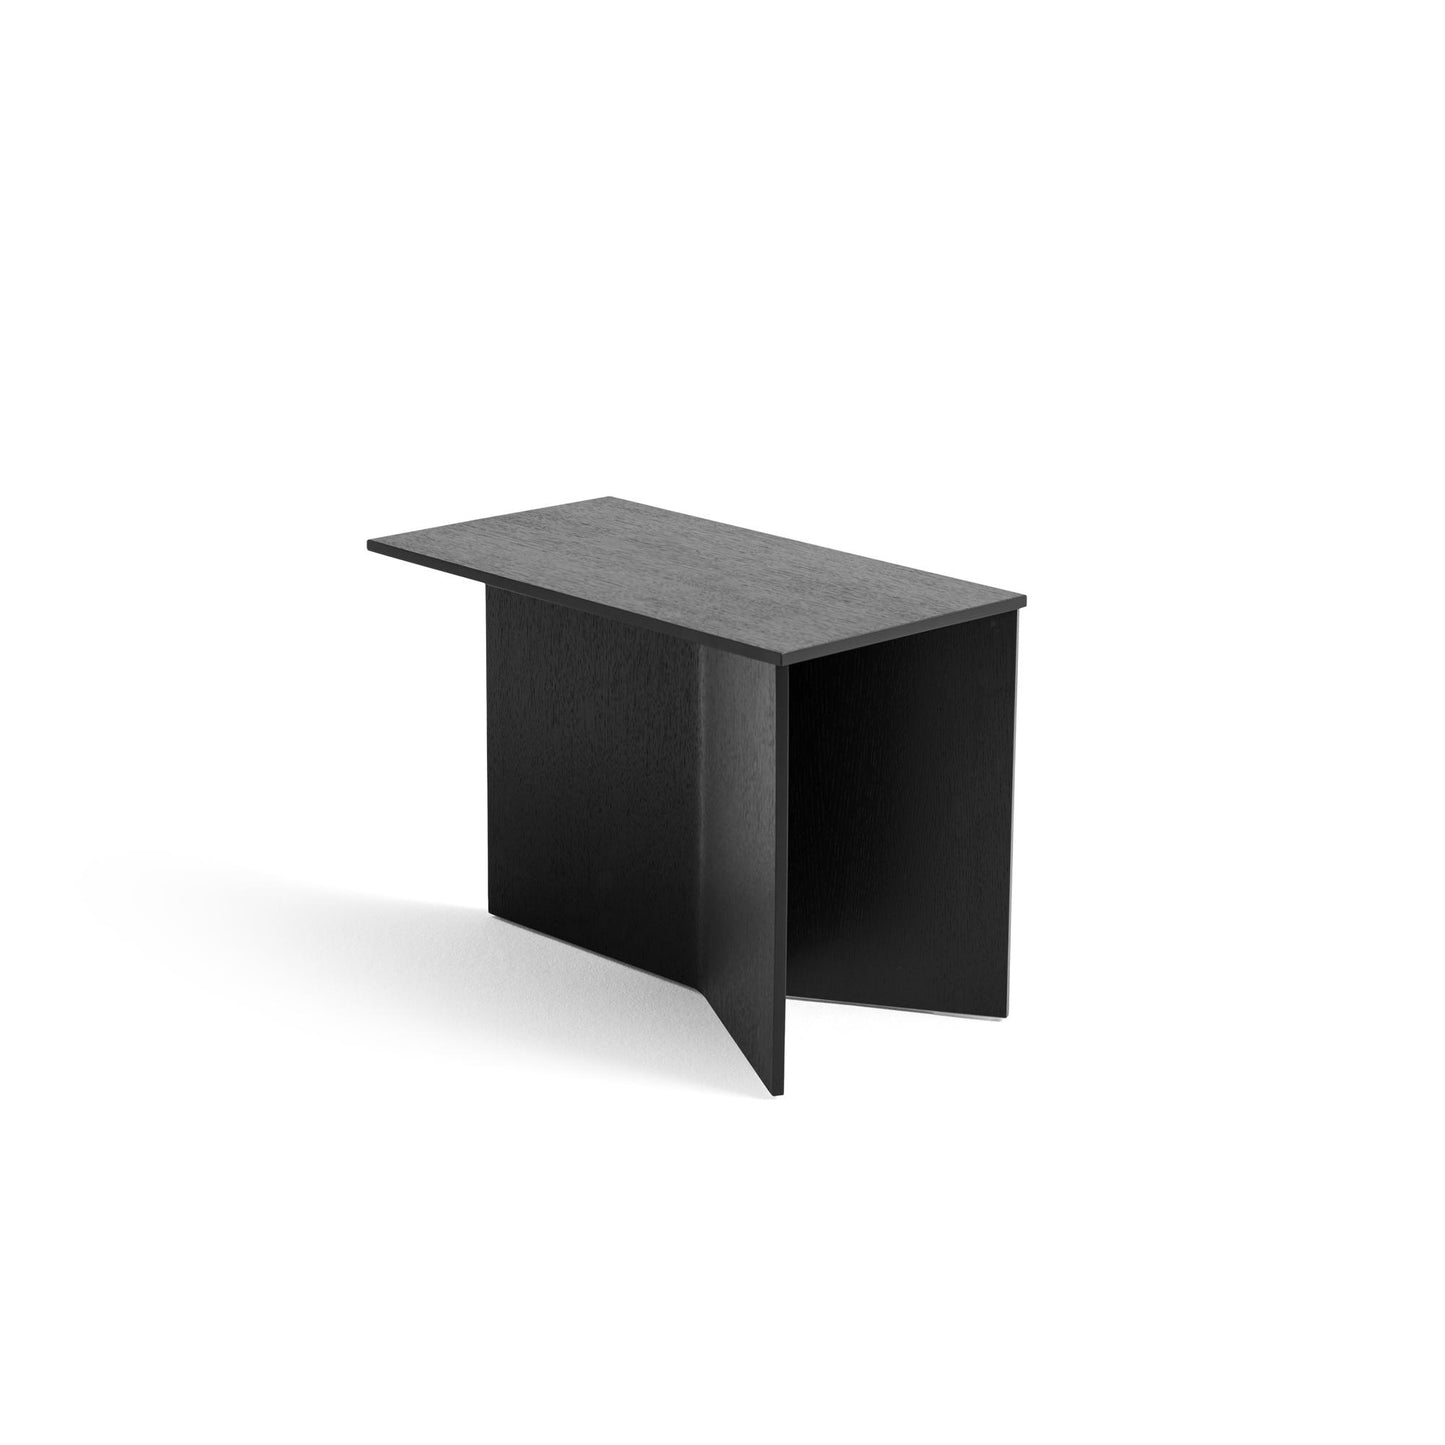 Slit Wood Coffee Table Oblong by HAY #Black